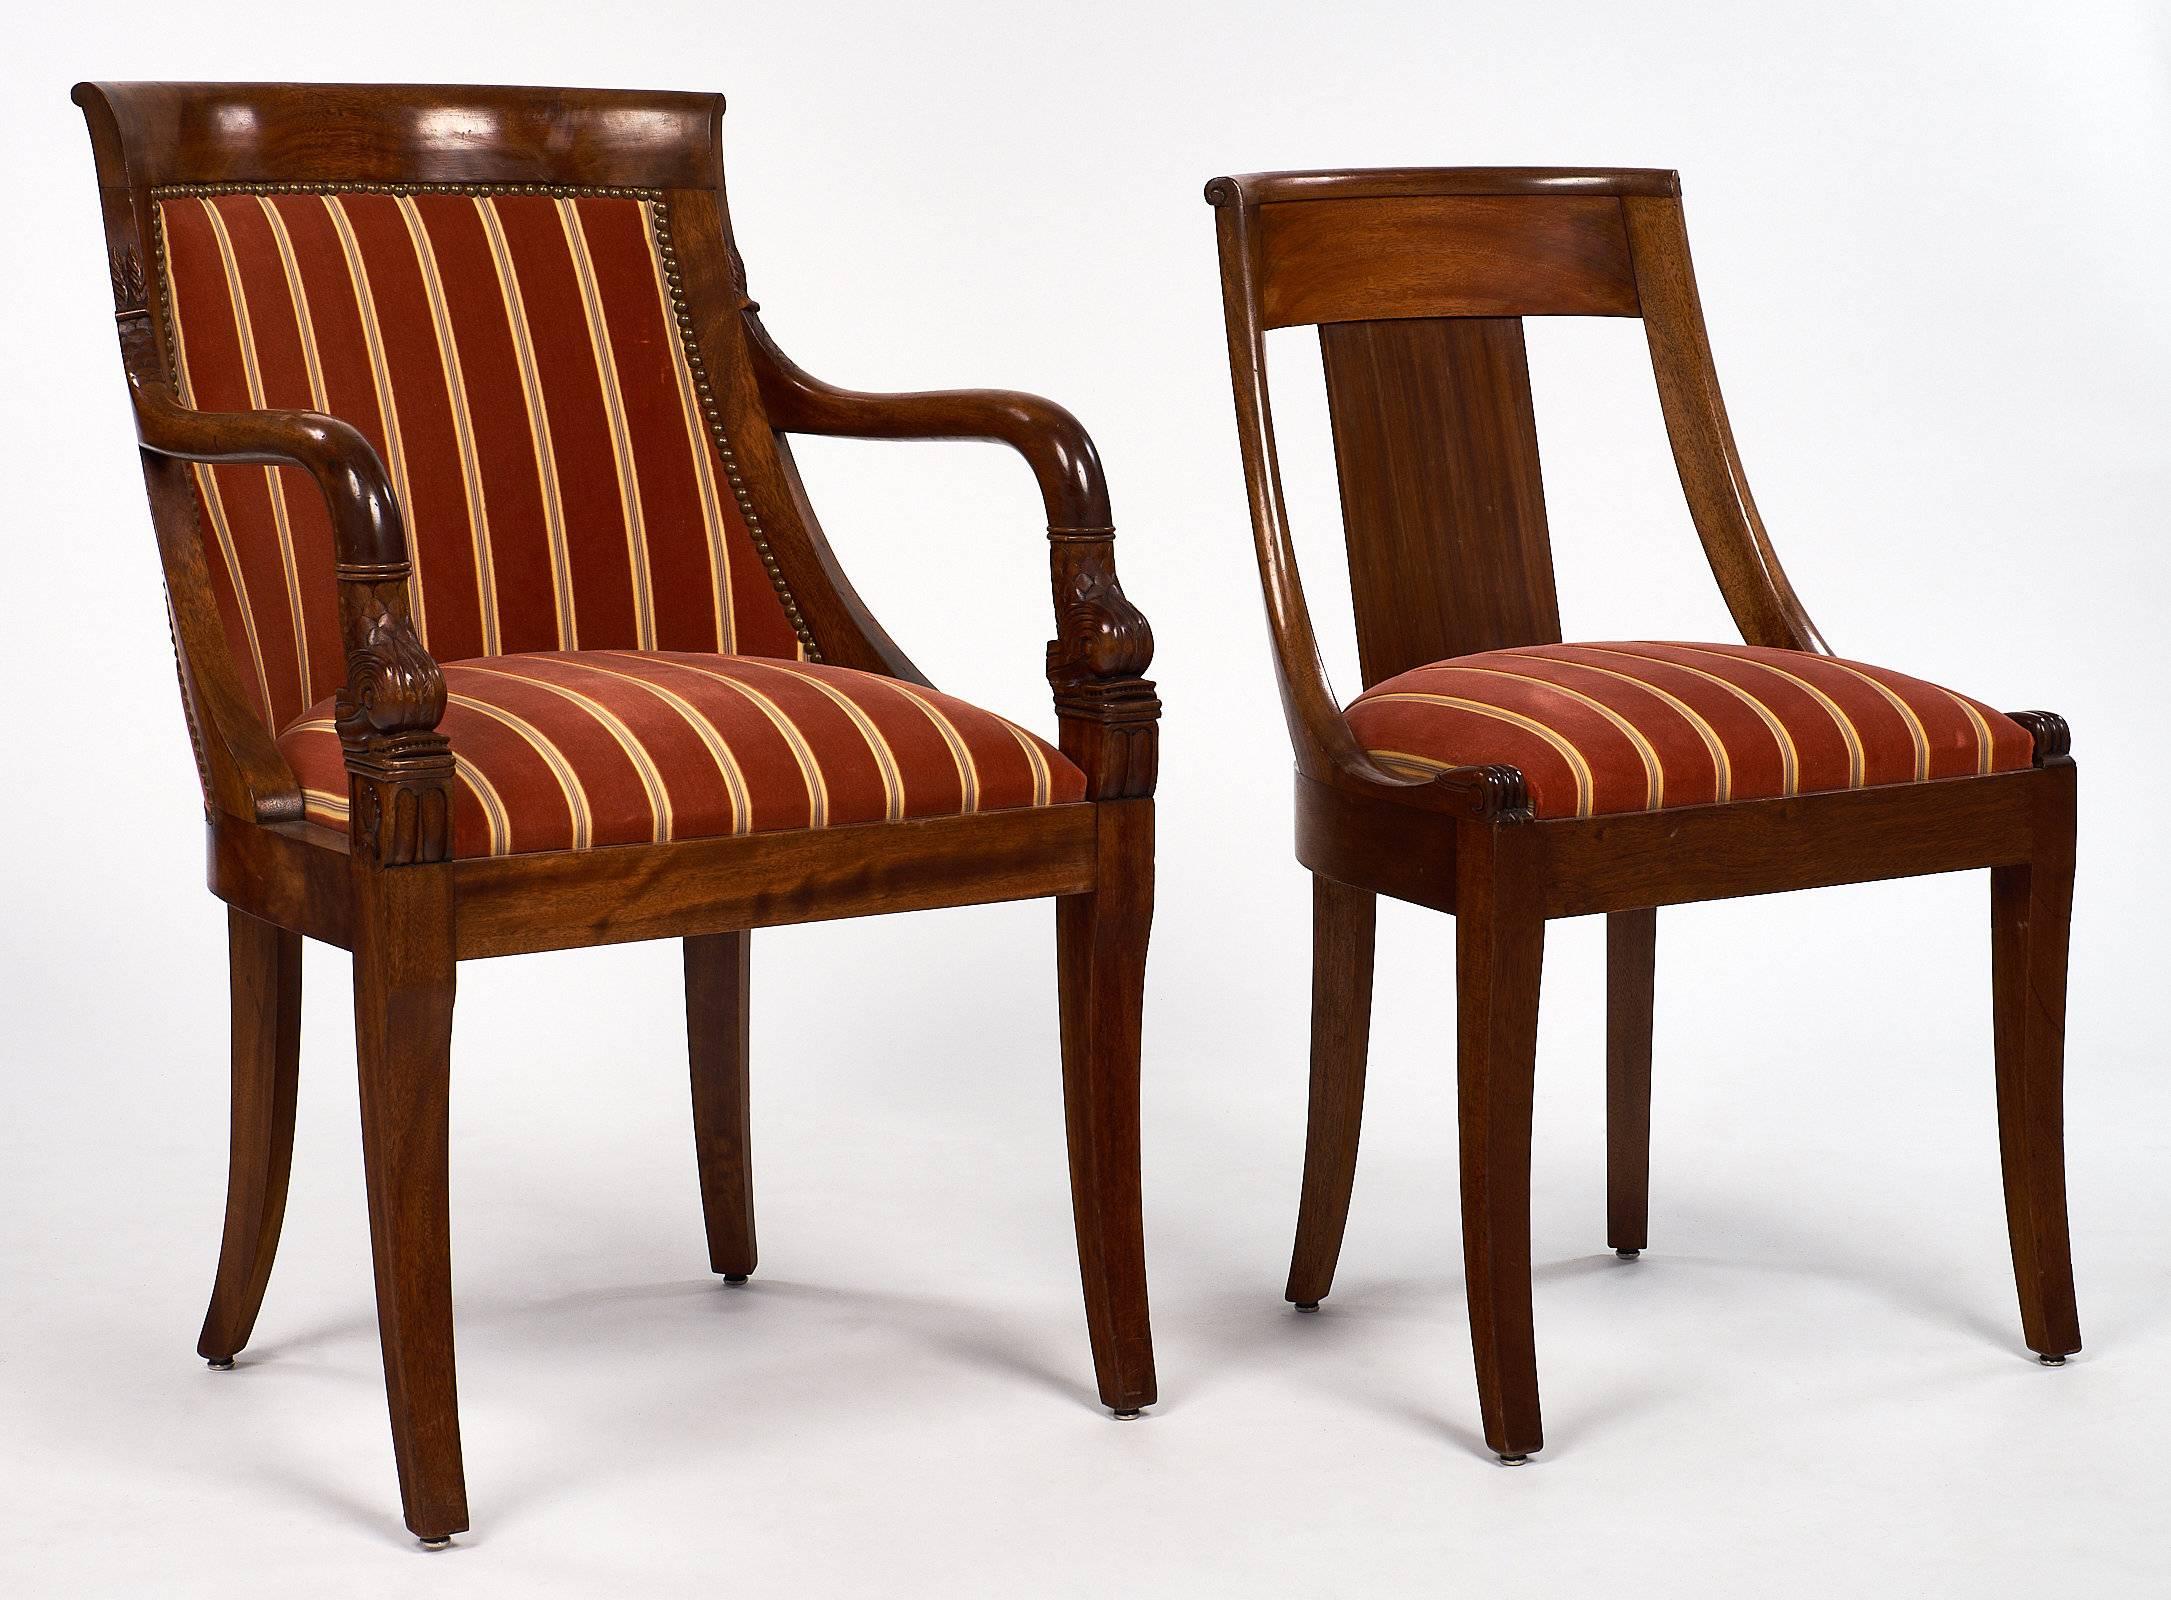 Set of seven Empire style dining chairs. Two of the chairs are armchairs with brass nailheads and beautifully carved mahogany frames. The arms have fantastic detail of stylized fish and scales, and the chairs are barrel shaped. The other five side